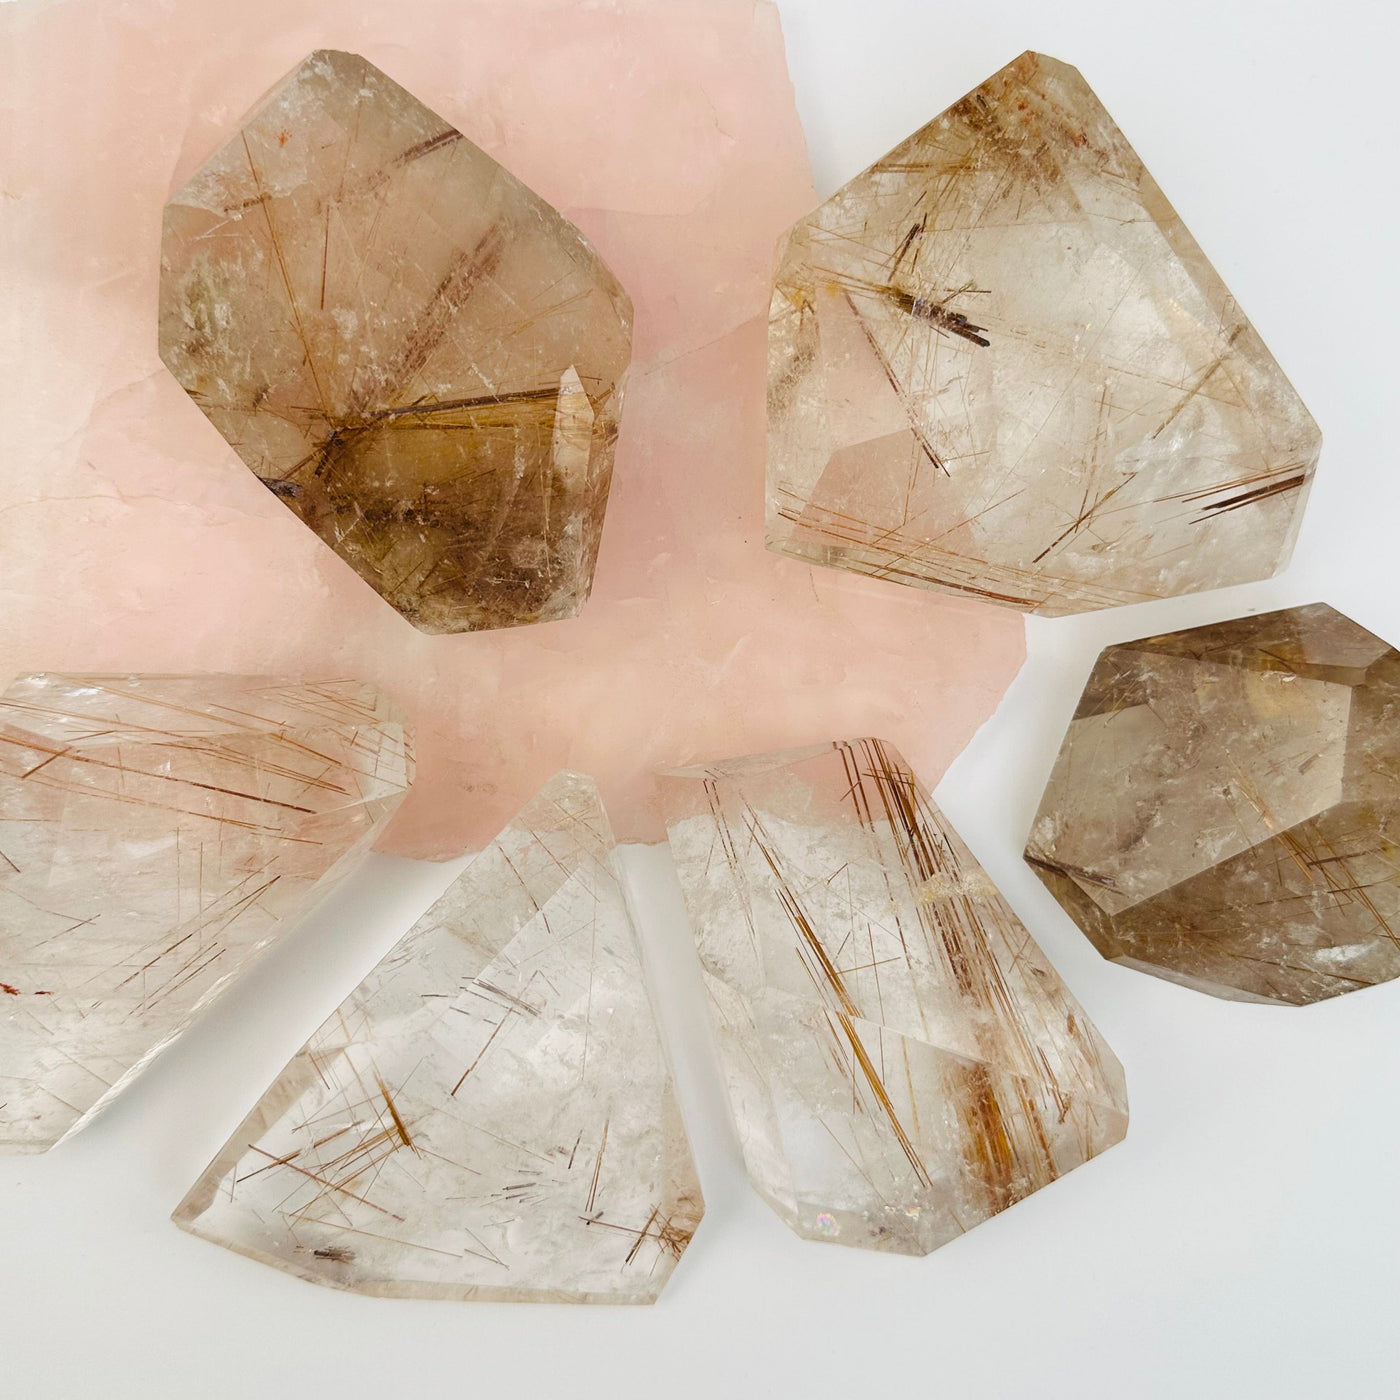 multiple rutilated crystal quartz displayed to show the differences in the sizes and color shades 